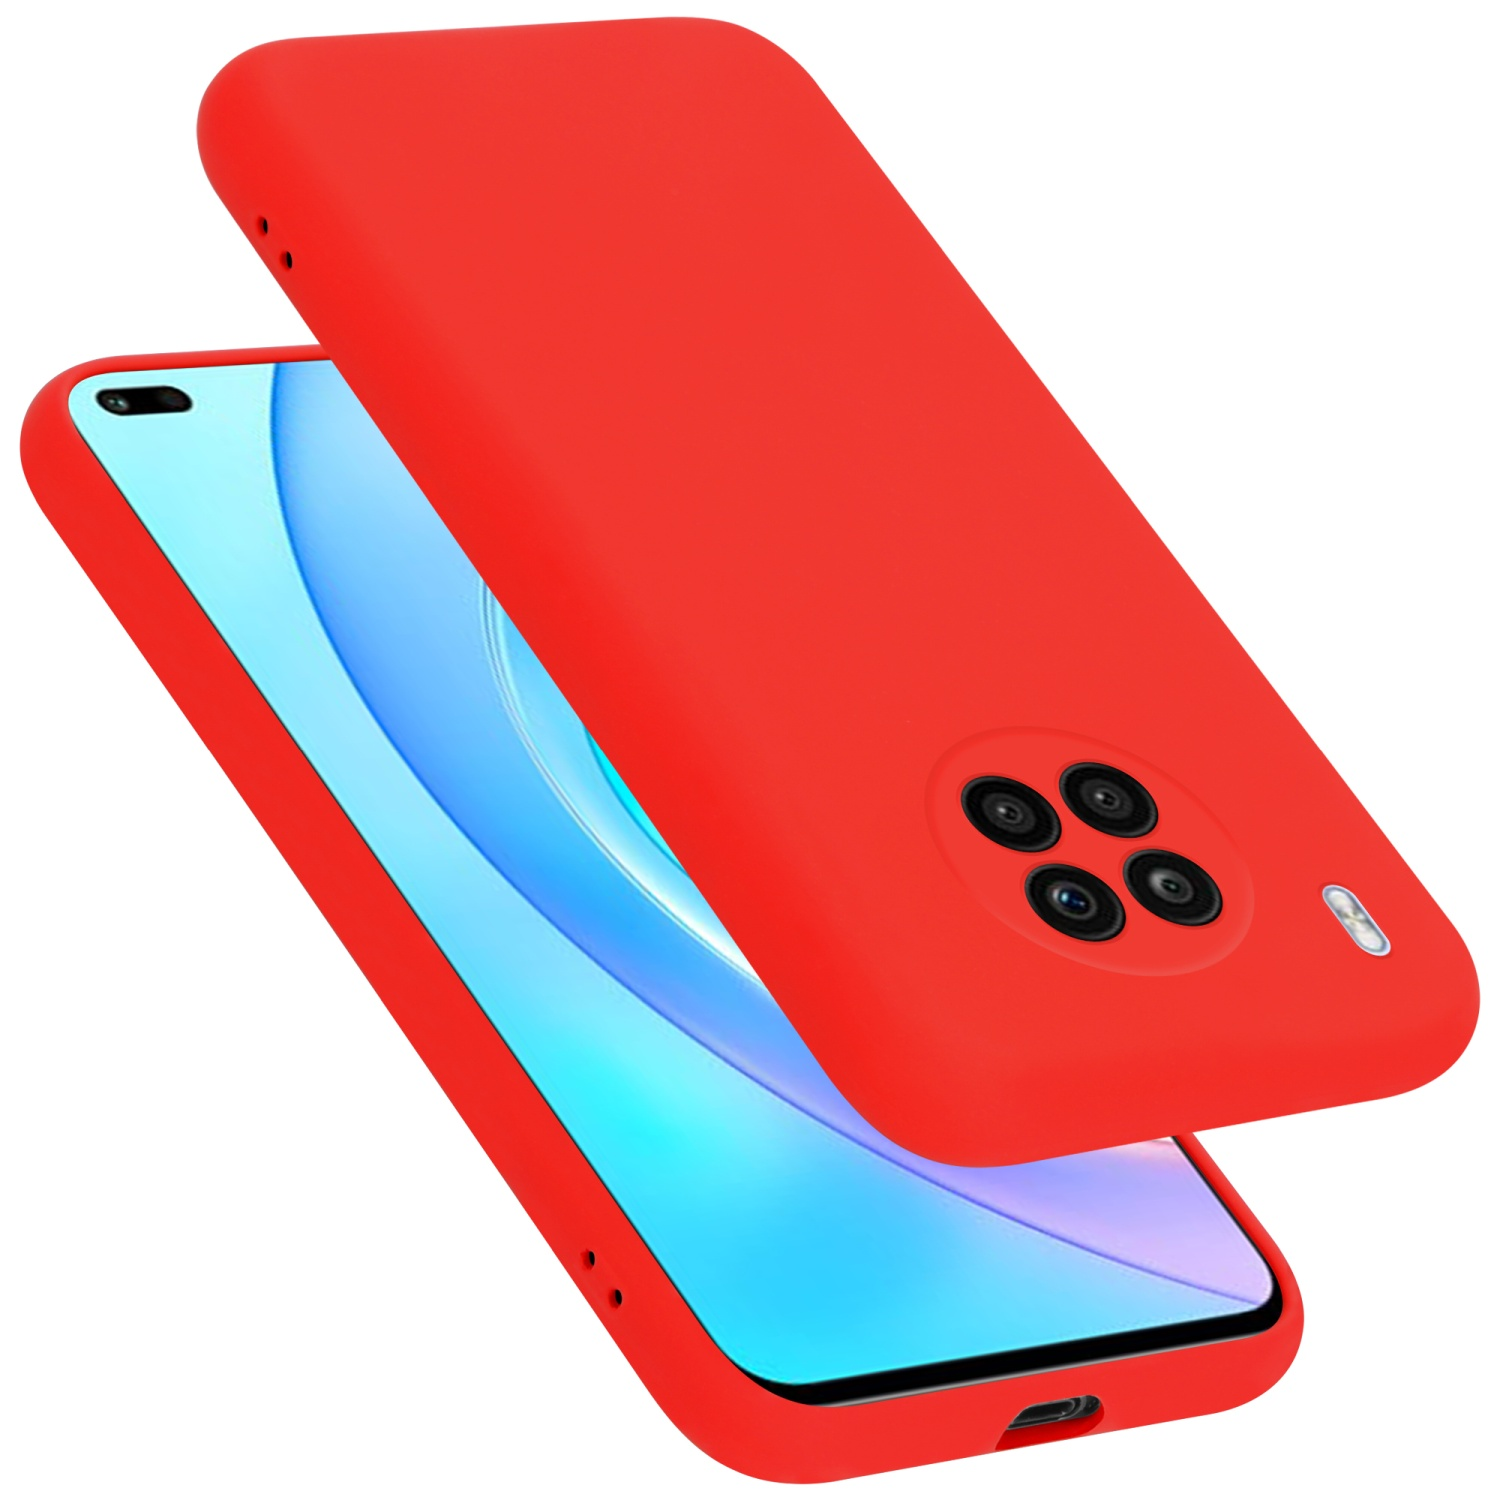 LIQUID Style, im Case LITE, ROT Silicone CADORABO 50 Backcover, Honor, Liquid Hülle